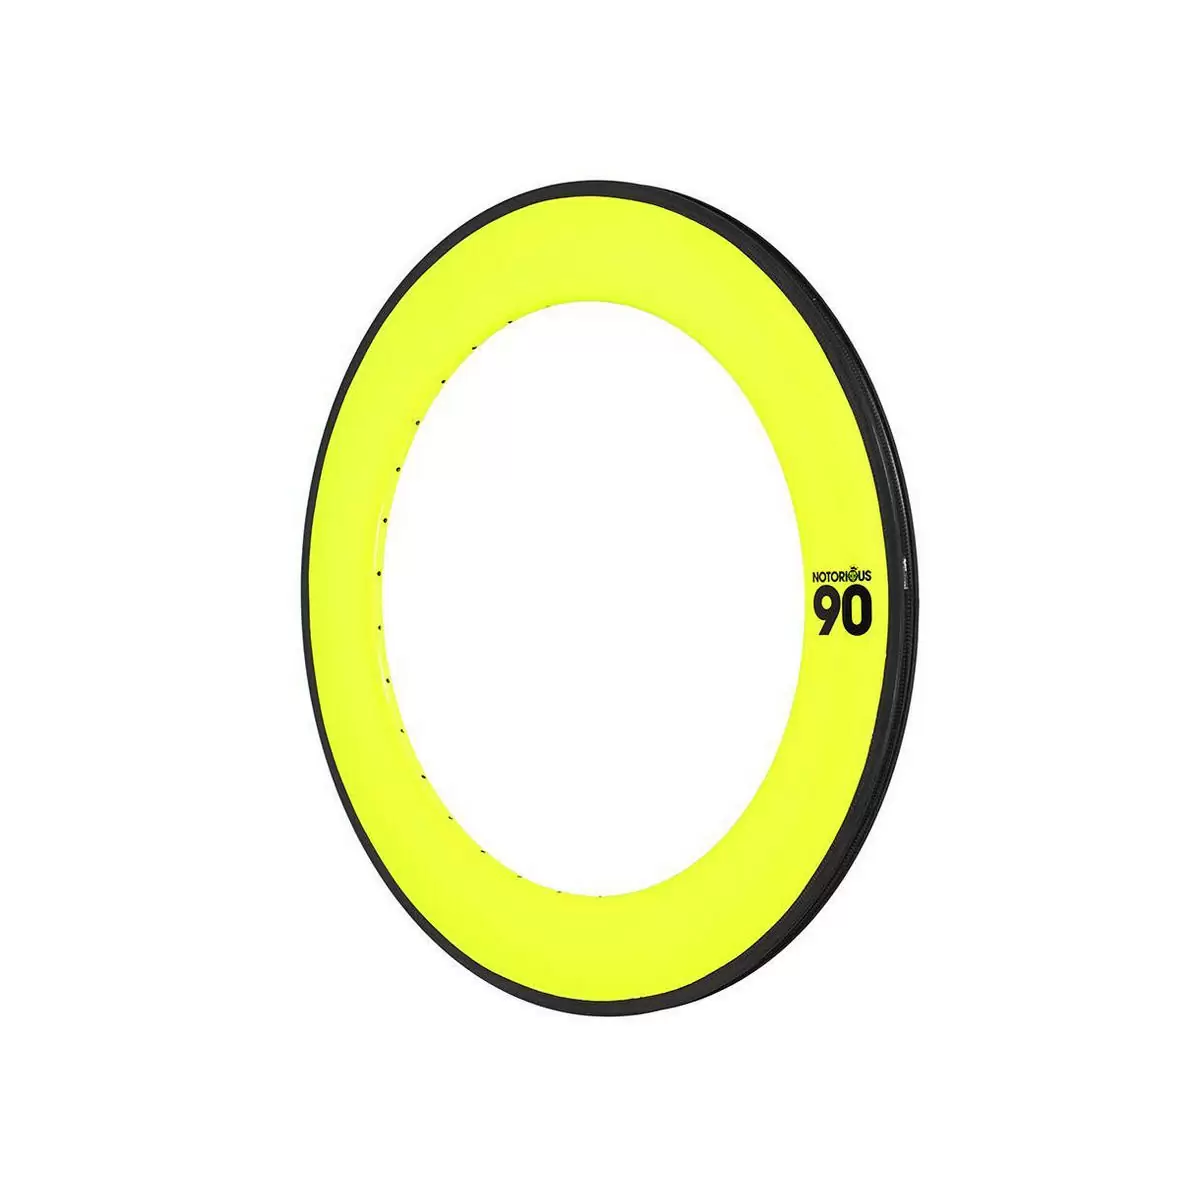 rim notorious 90 700c carbon 32h msw fluo yellow - image